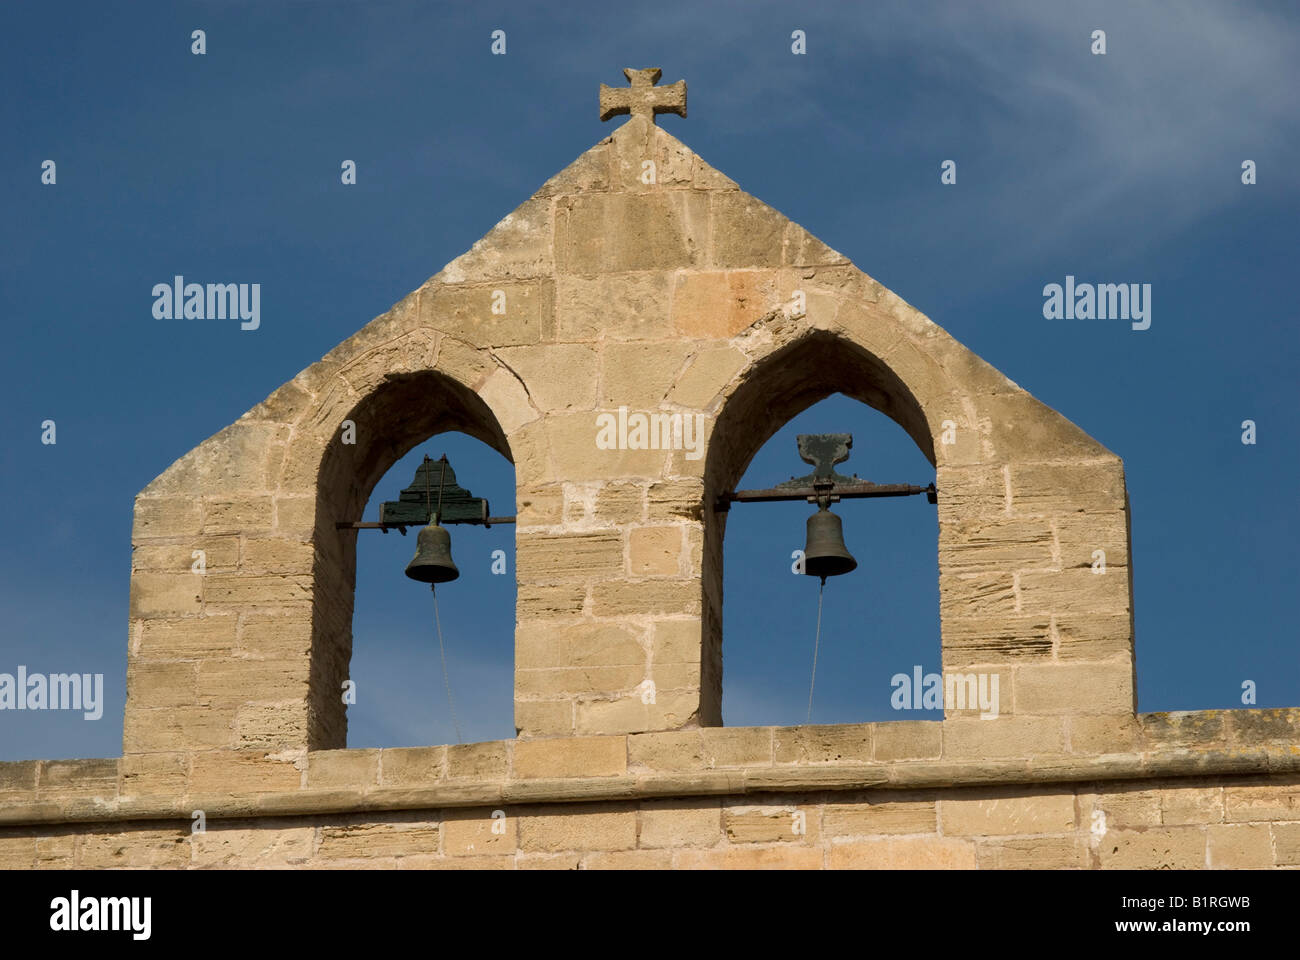 Bell tower of the Castle of Capdepera, Majorca, Balearic Islands, Spain, Europe Stock Photo